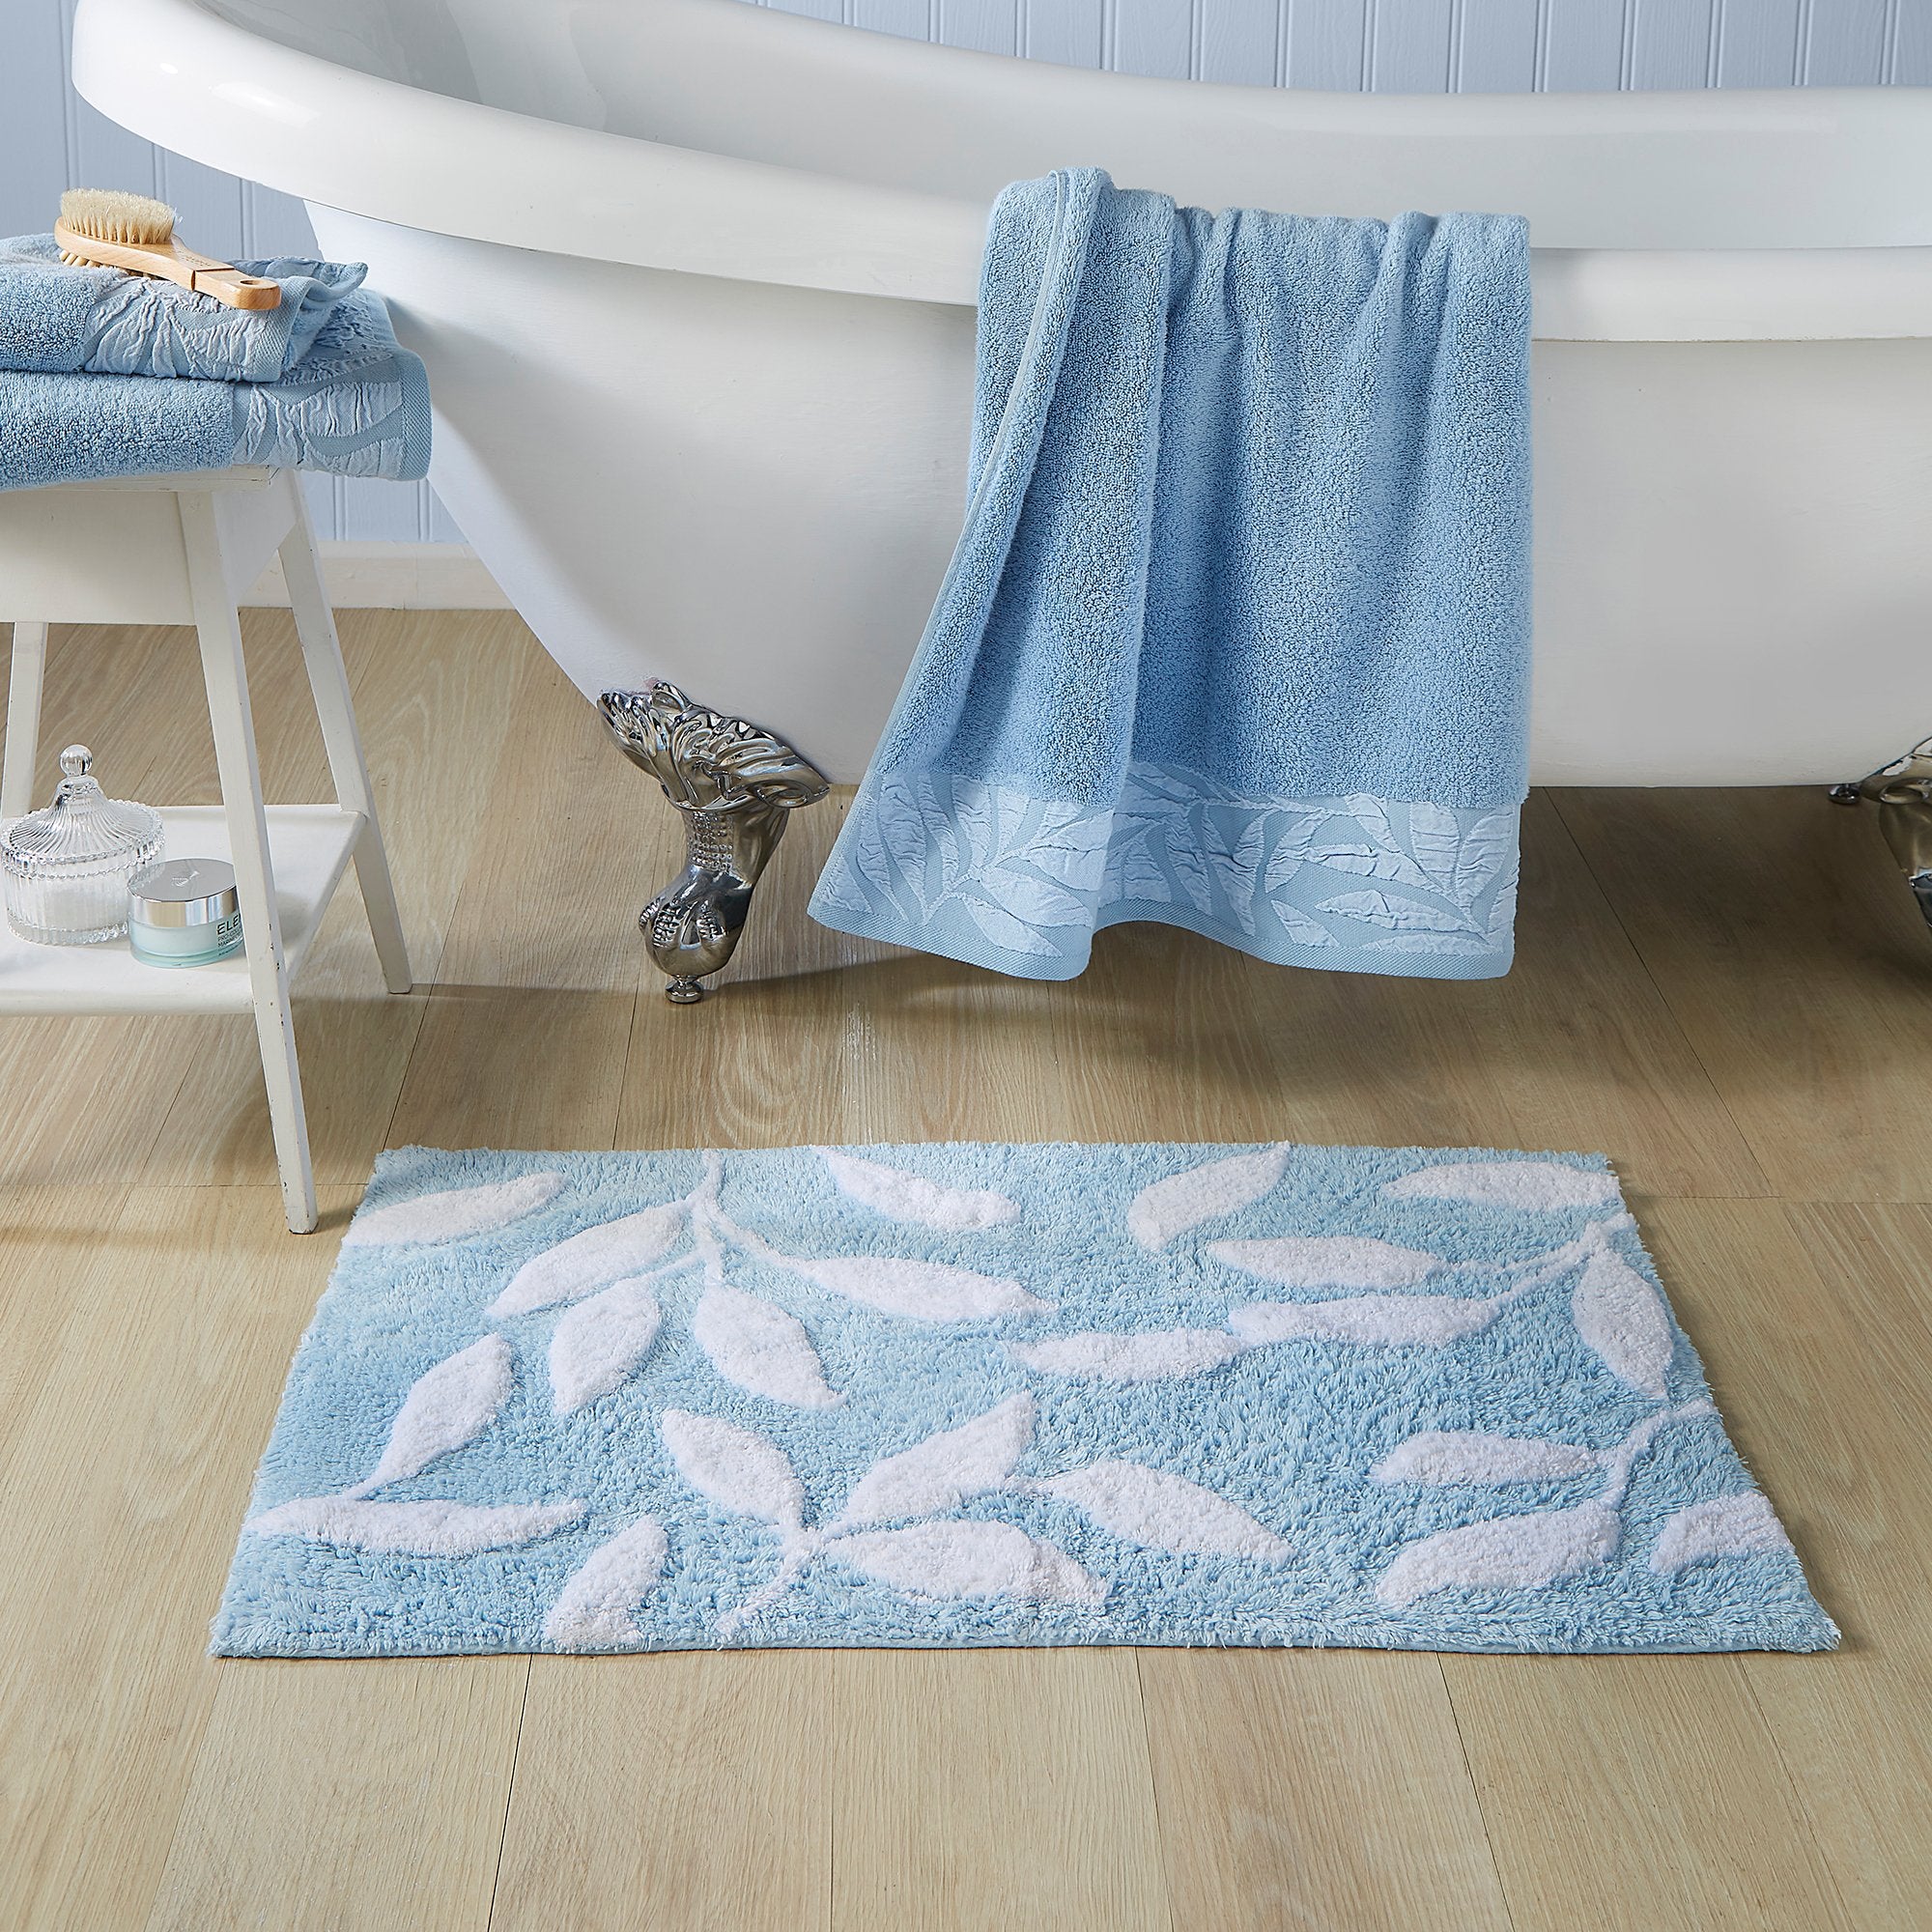 Towels Lacie by Dreams & Drapes Bathroom in Blue